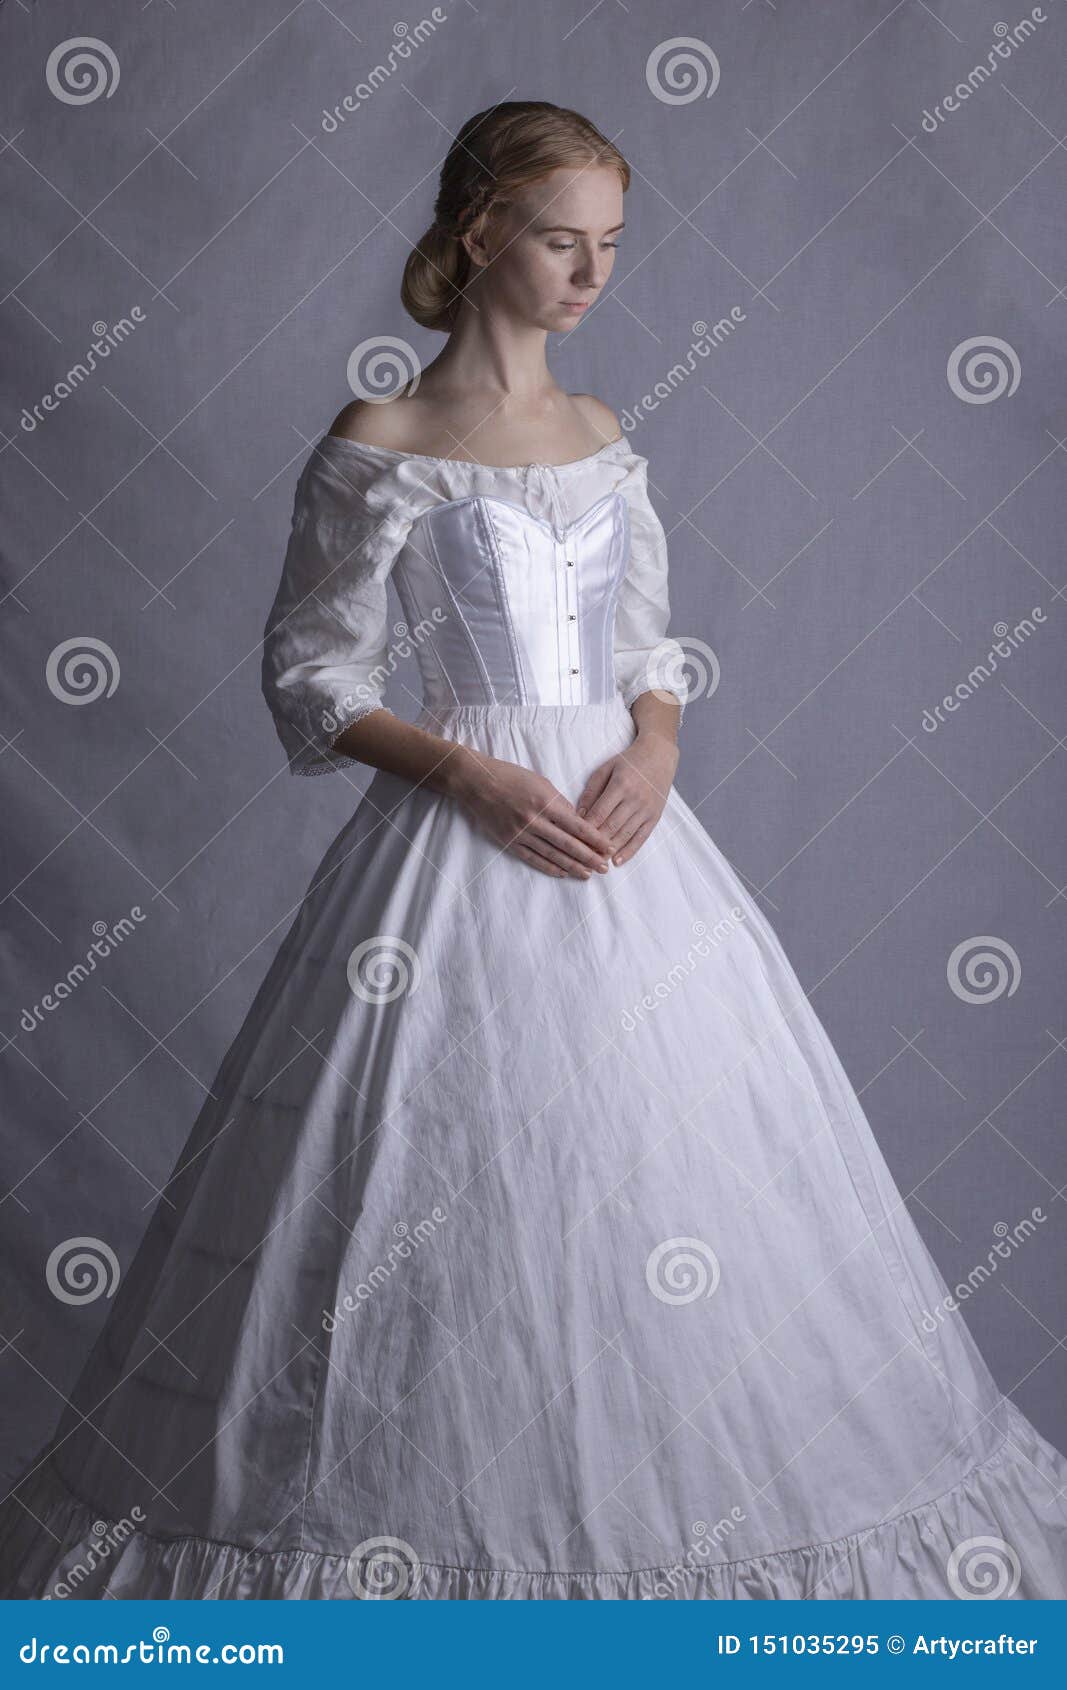 Victorian Woman in Underwear Stock Image - Image of ensemble